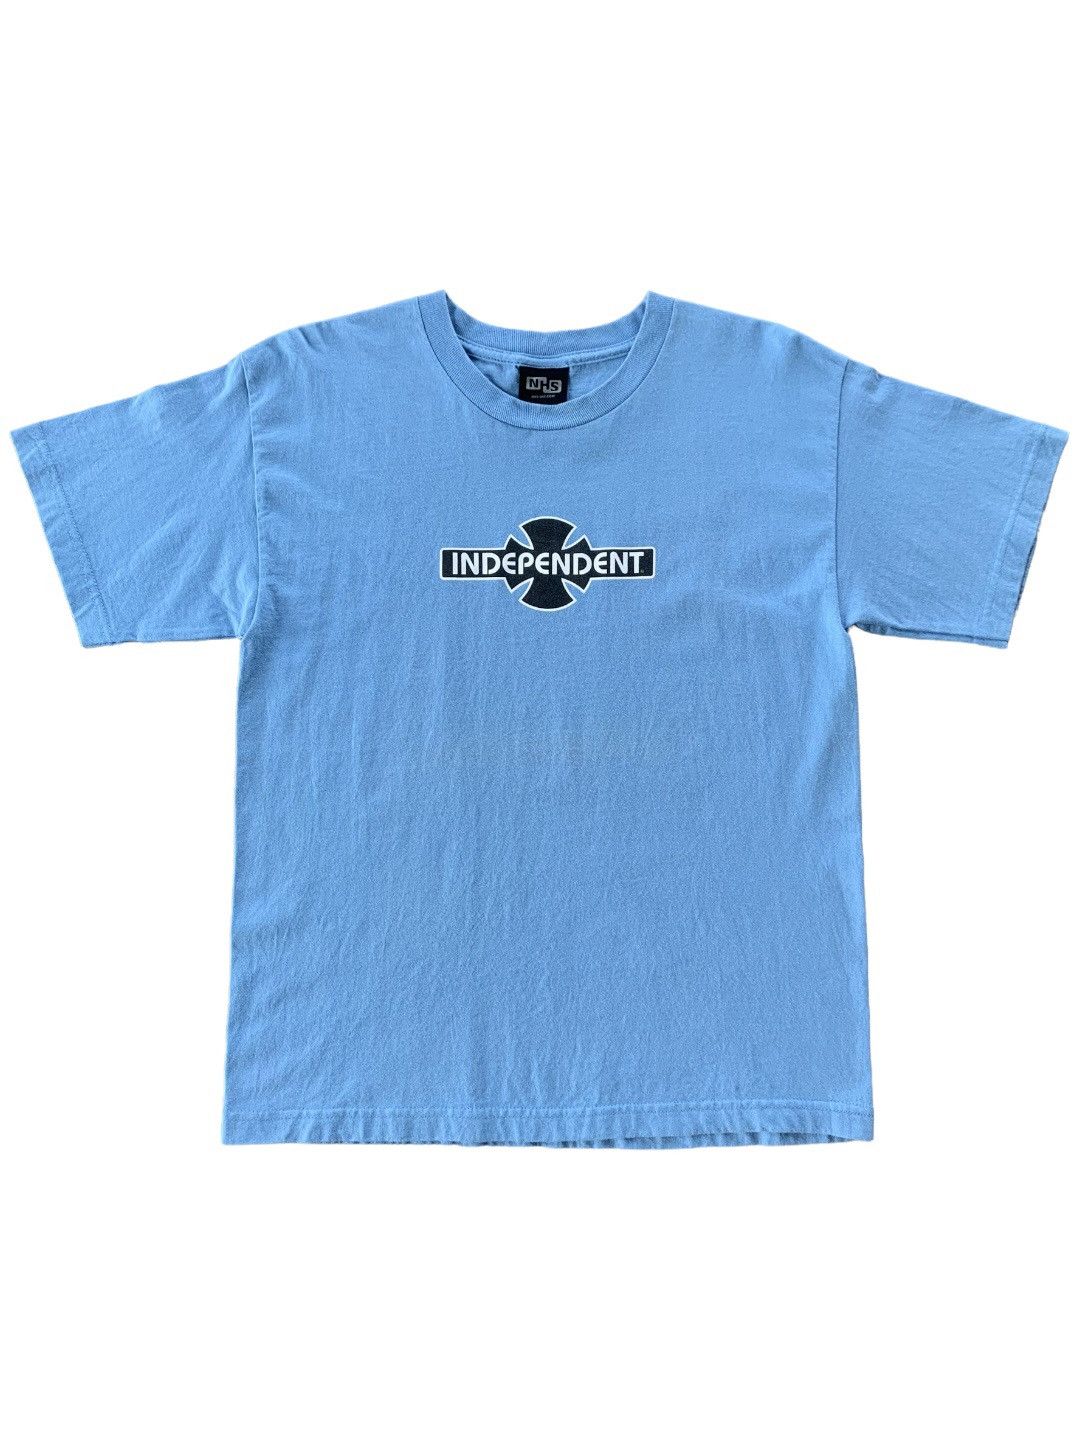 Independent Truck Co Nhs | Grailed